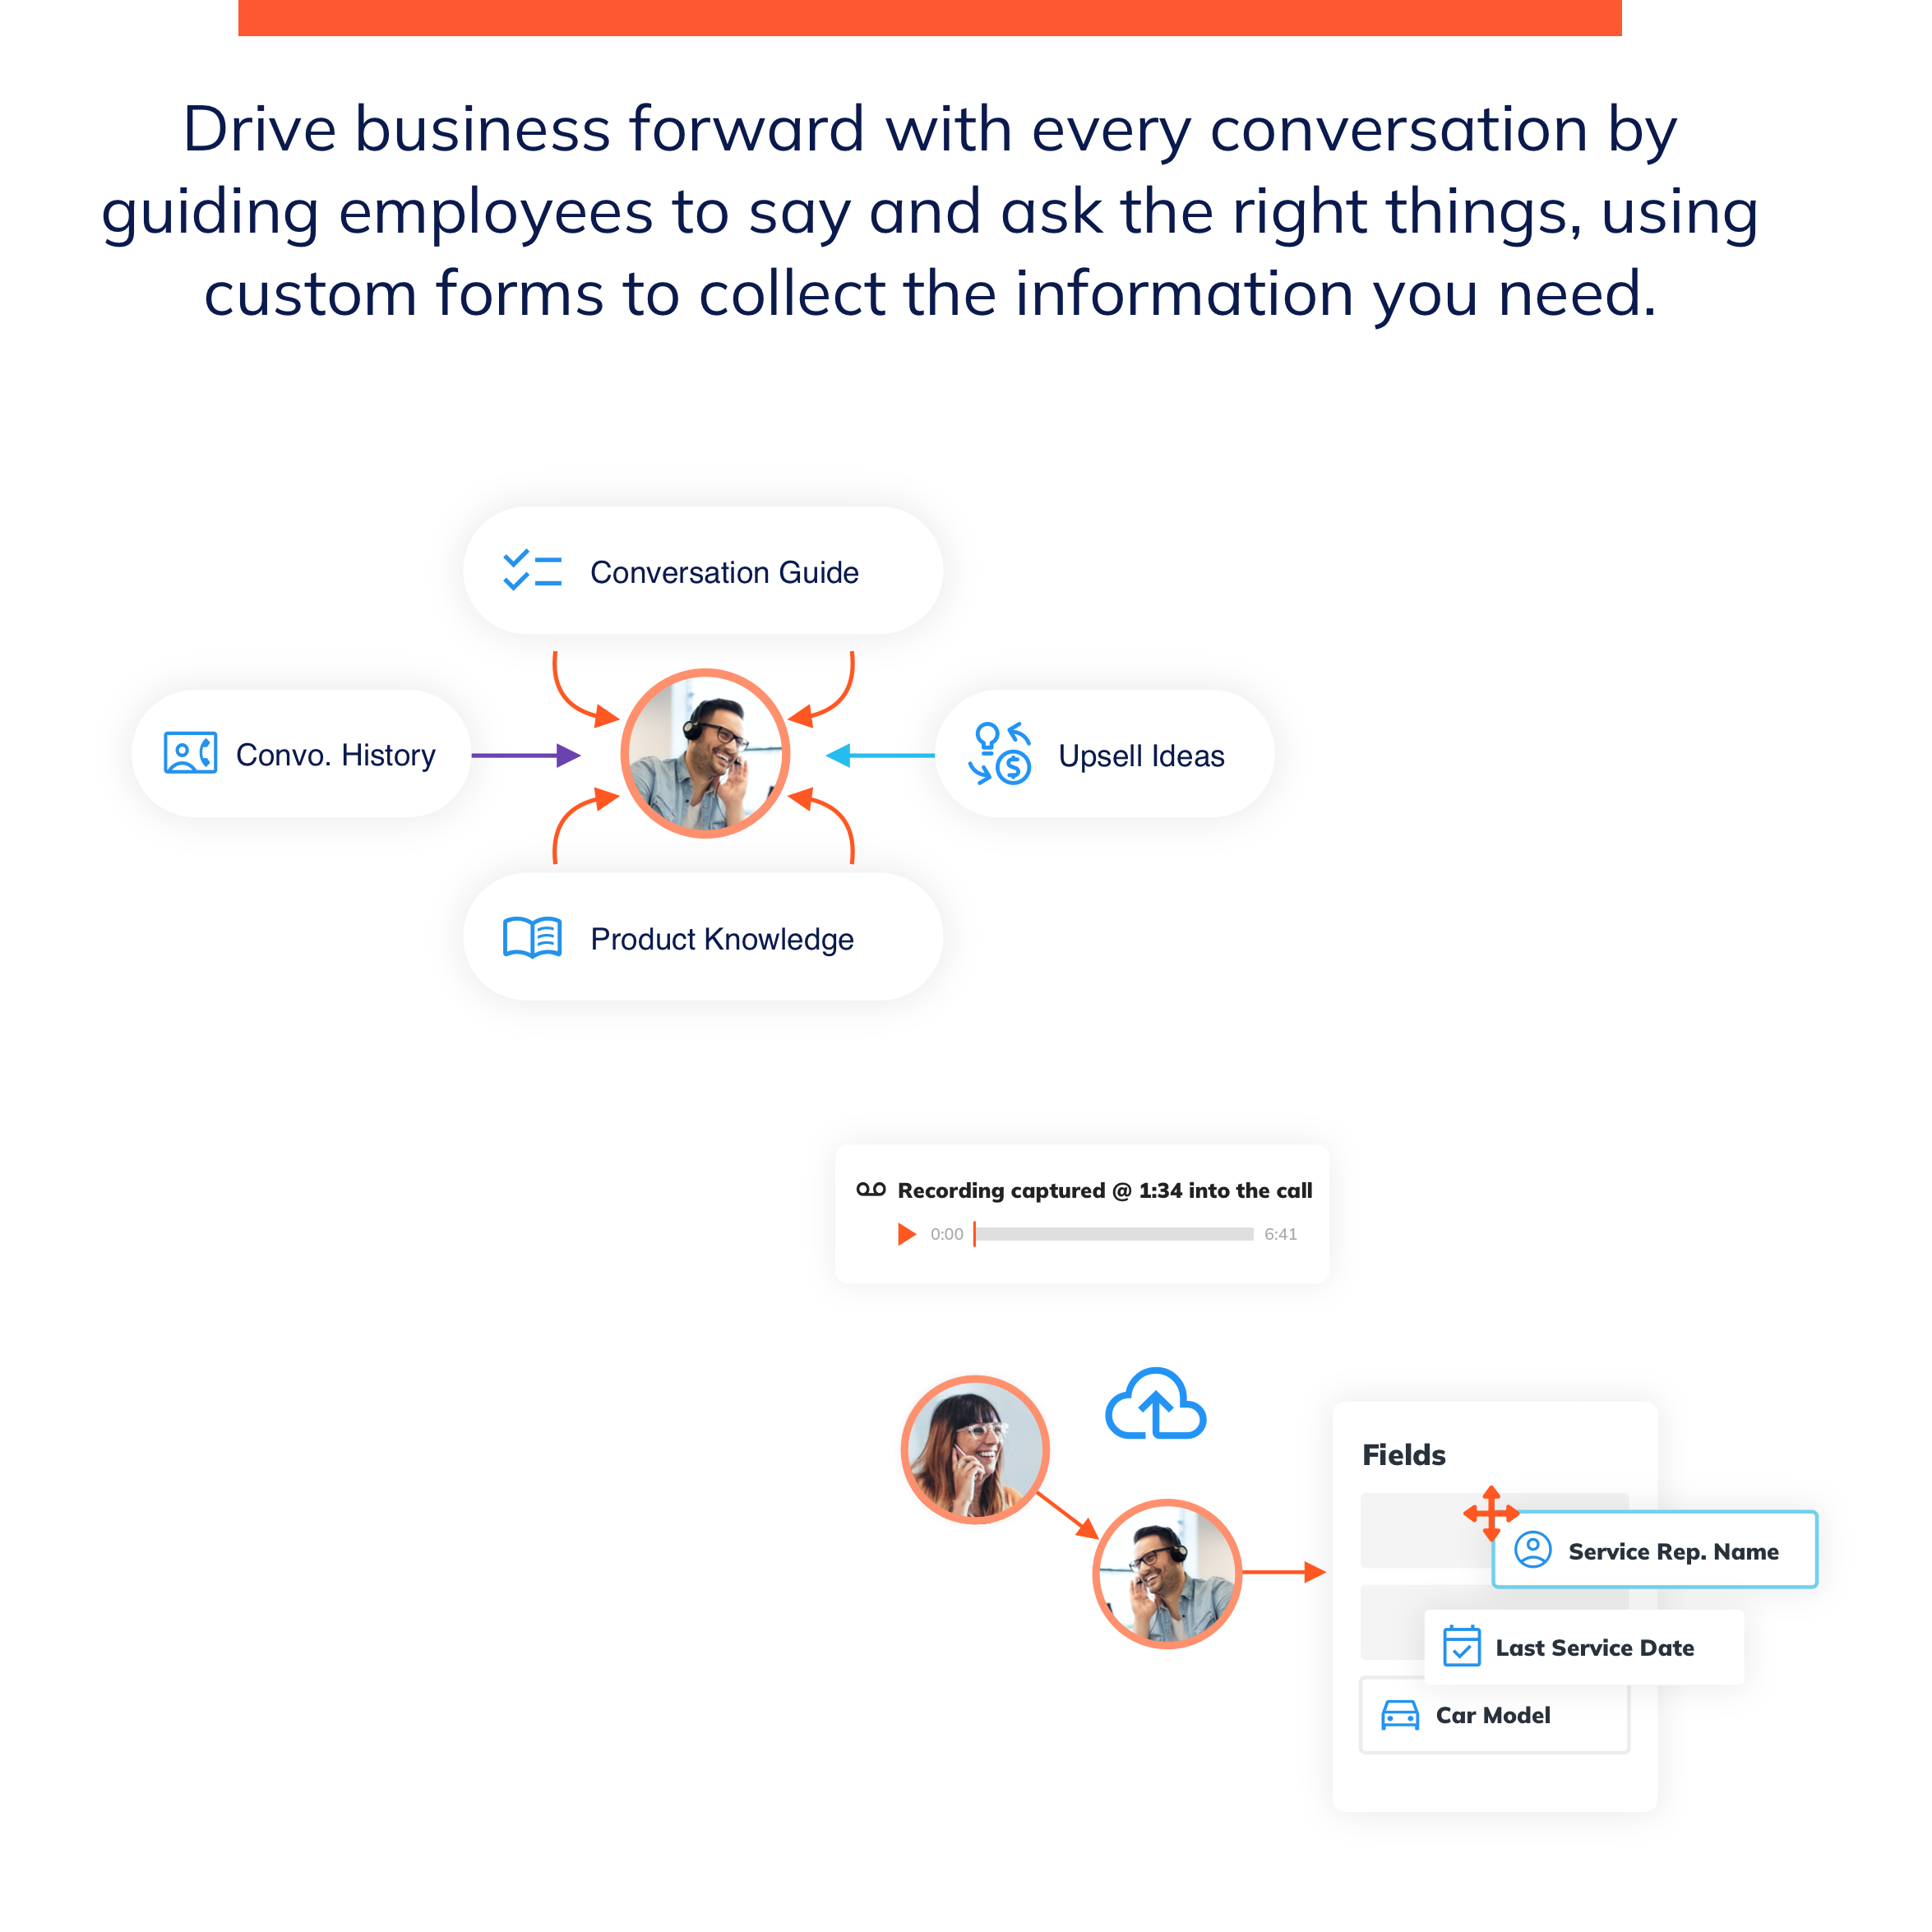 Spoke Phone Guided Conversations and Custom Forms Help Employees Ask and Say this Right Things To Close More Deals and Capture The Right Business Data Into Your CRM